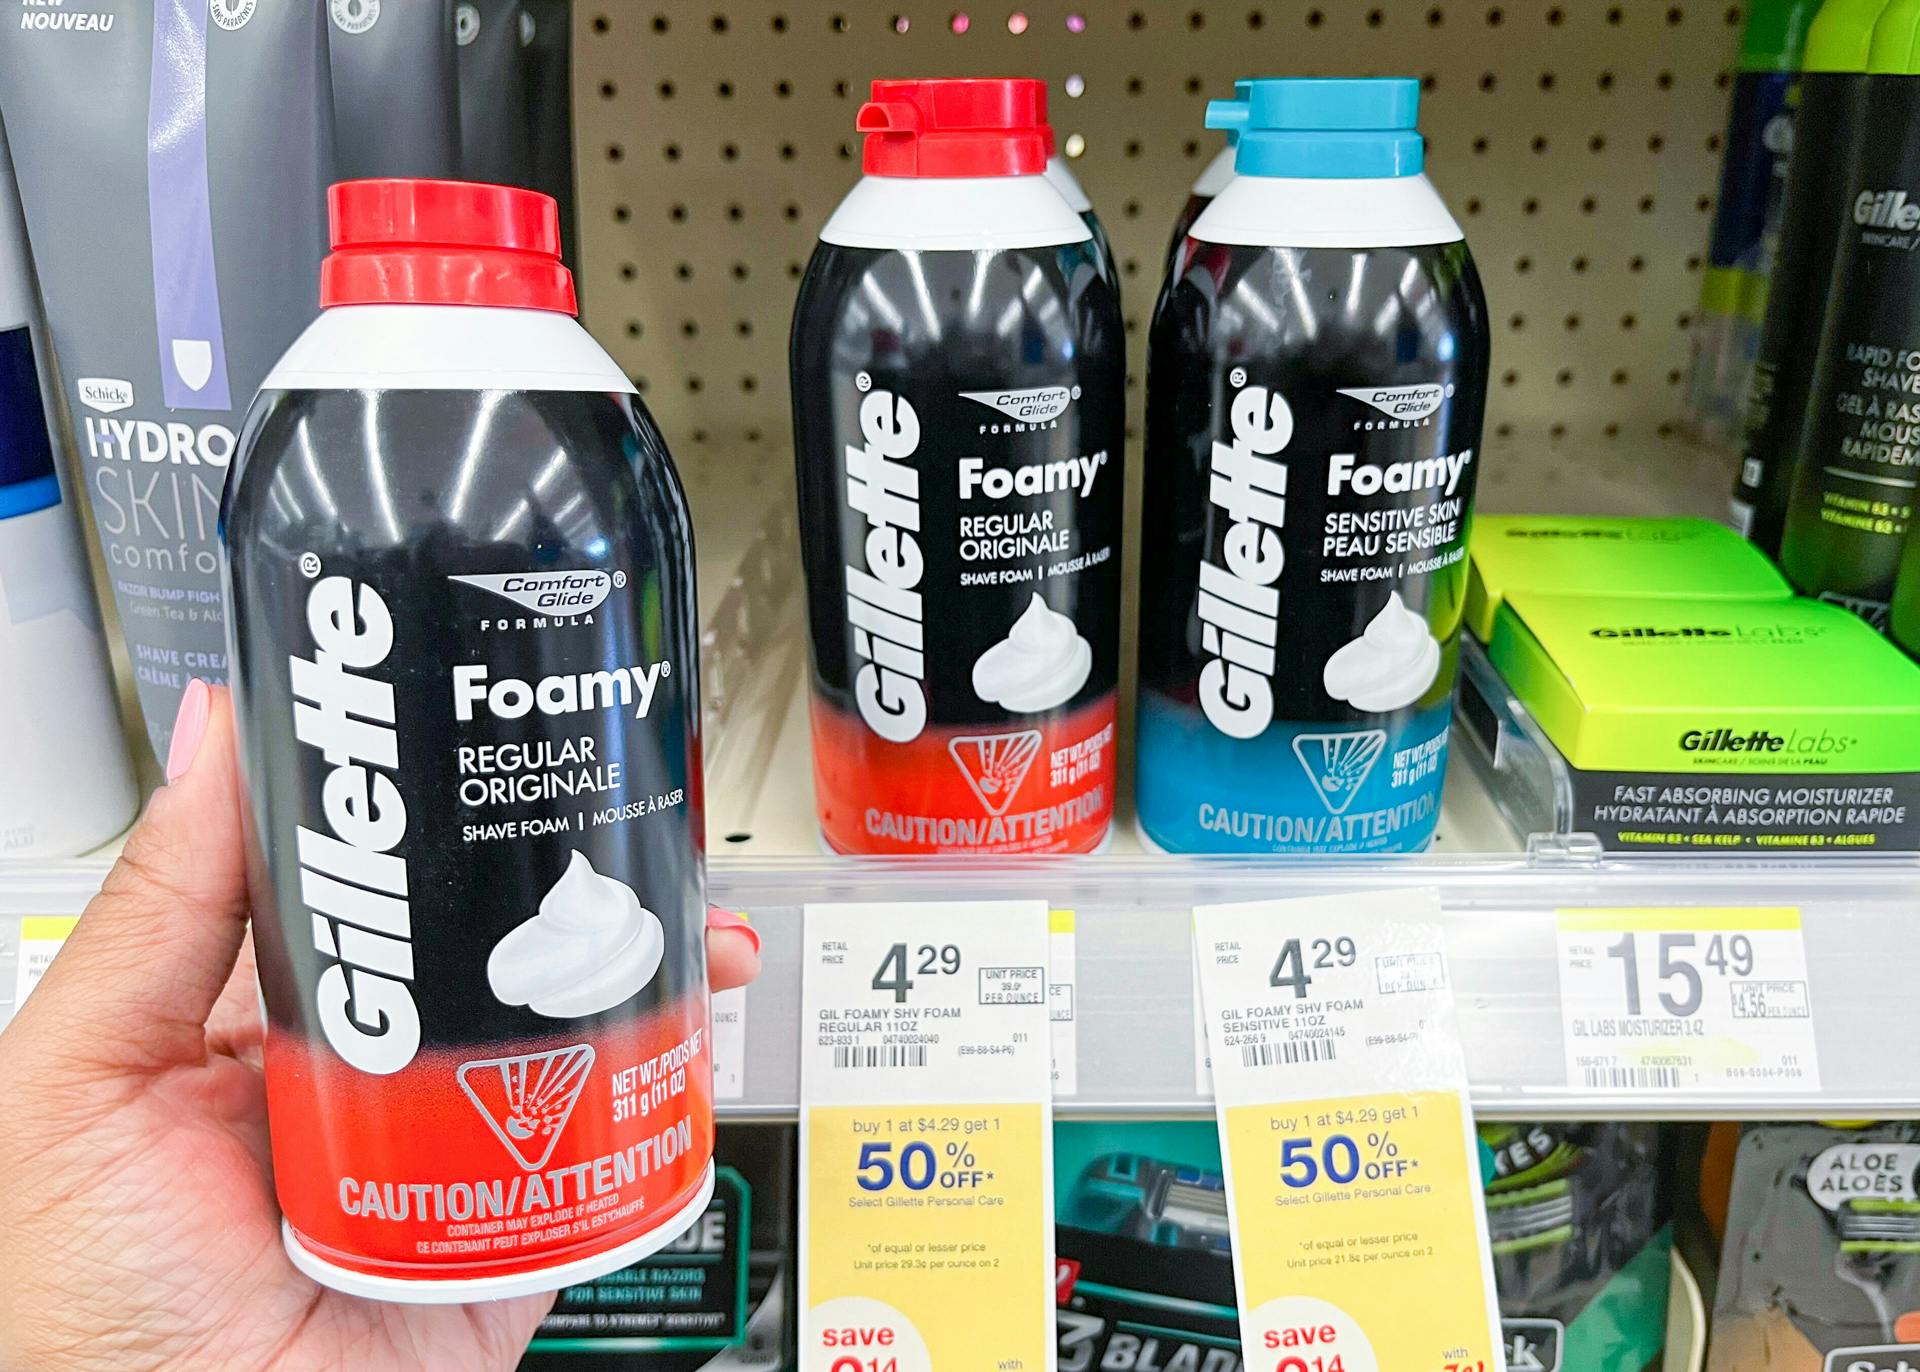 A person's hand holding up a bottle of Gillette Foamy shaving cream in front of a shelf with more Gillette shaving cream at Walgreens.